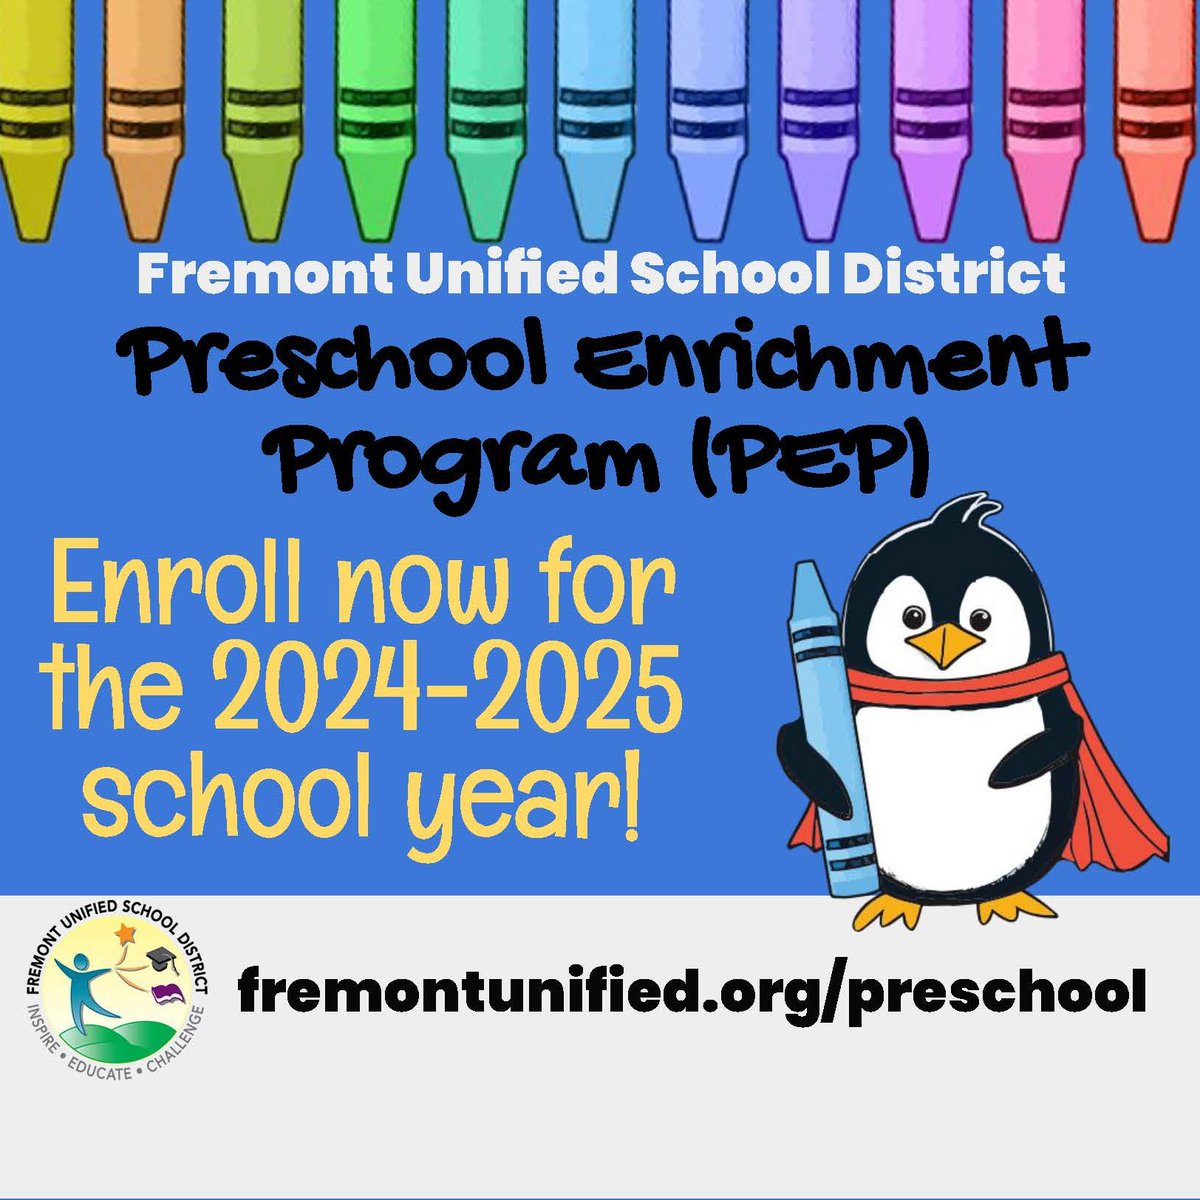 Enroll in the #FremontUnified Preschool Enrichment Program now for 2024-25! This tuition-based program has play-based curriculum, and 1:8 staff:student ratios! Choose 2, 3, OR 5 days a week, 8:30-11:50am at the Hyman Learning Center. Info, application: fremontunified.org/preschool